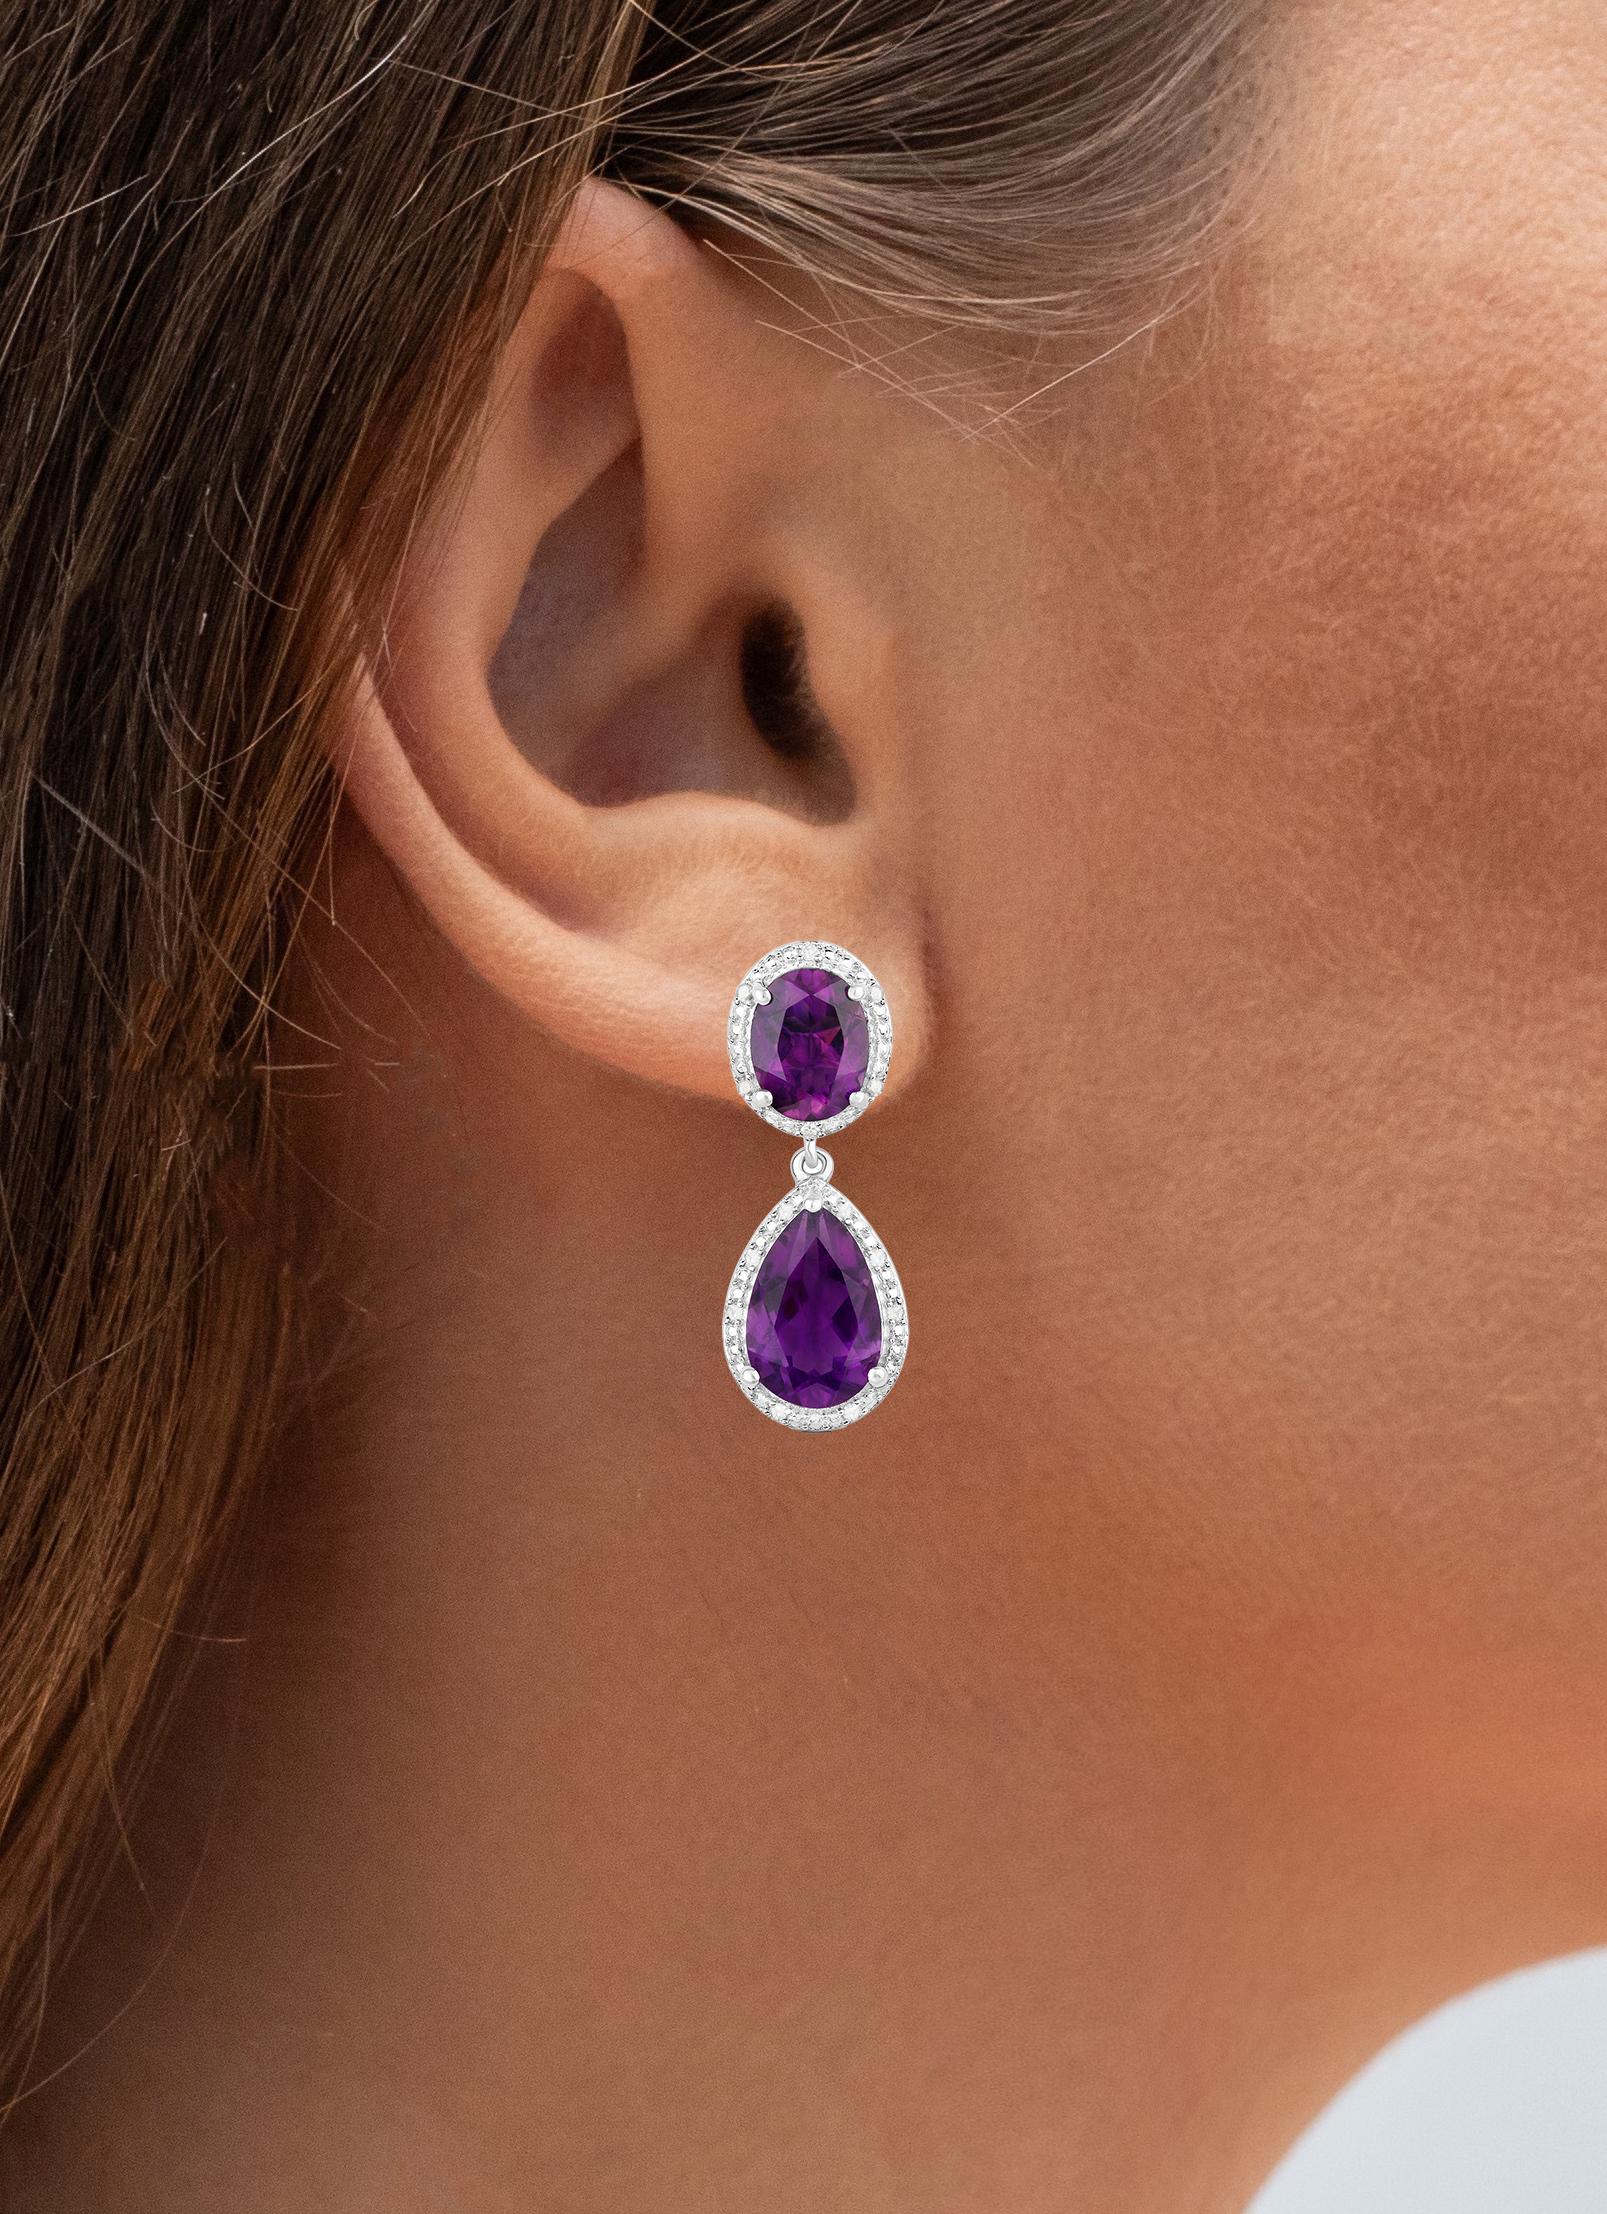 Contemporary Amethyst Earrings With Diamonds 8.45 Carats Rhodium Plated Sterling Silver For Sale